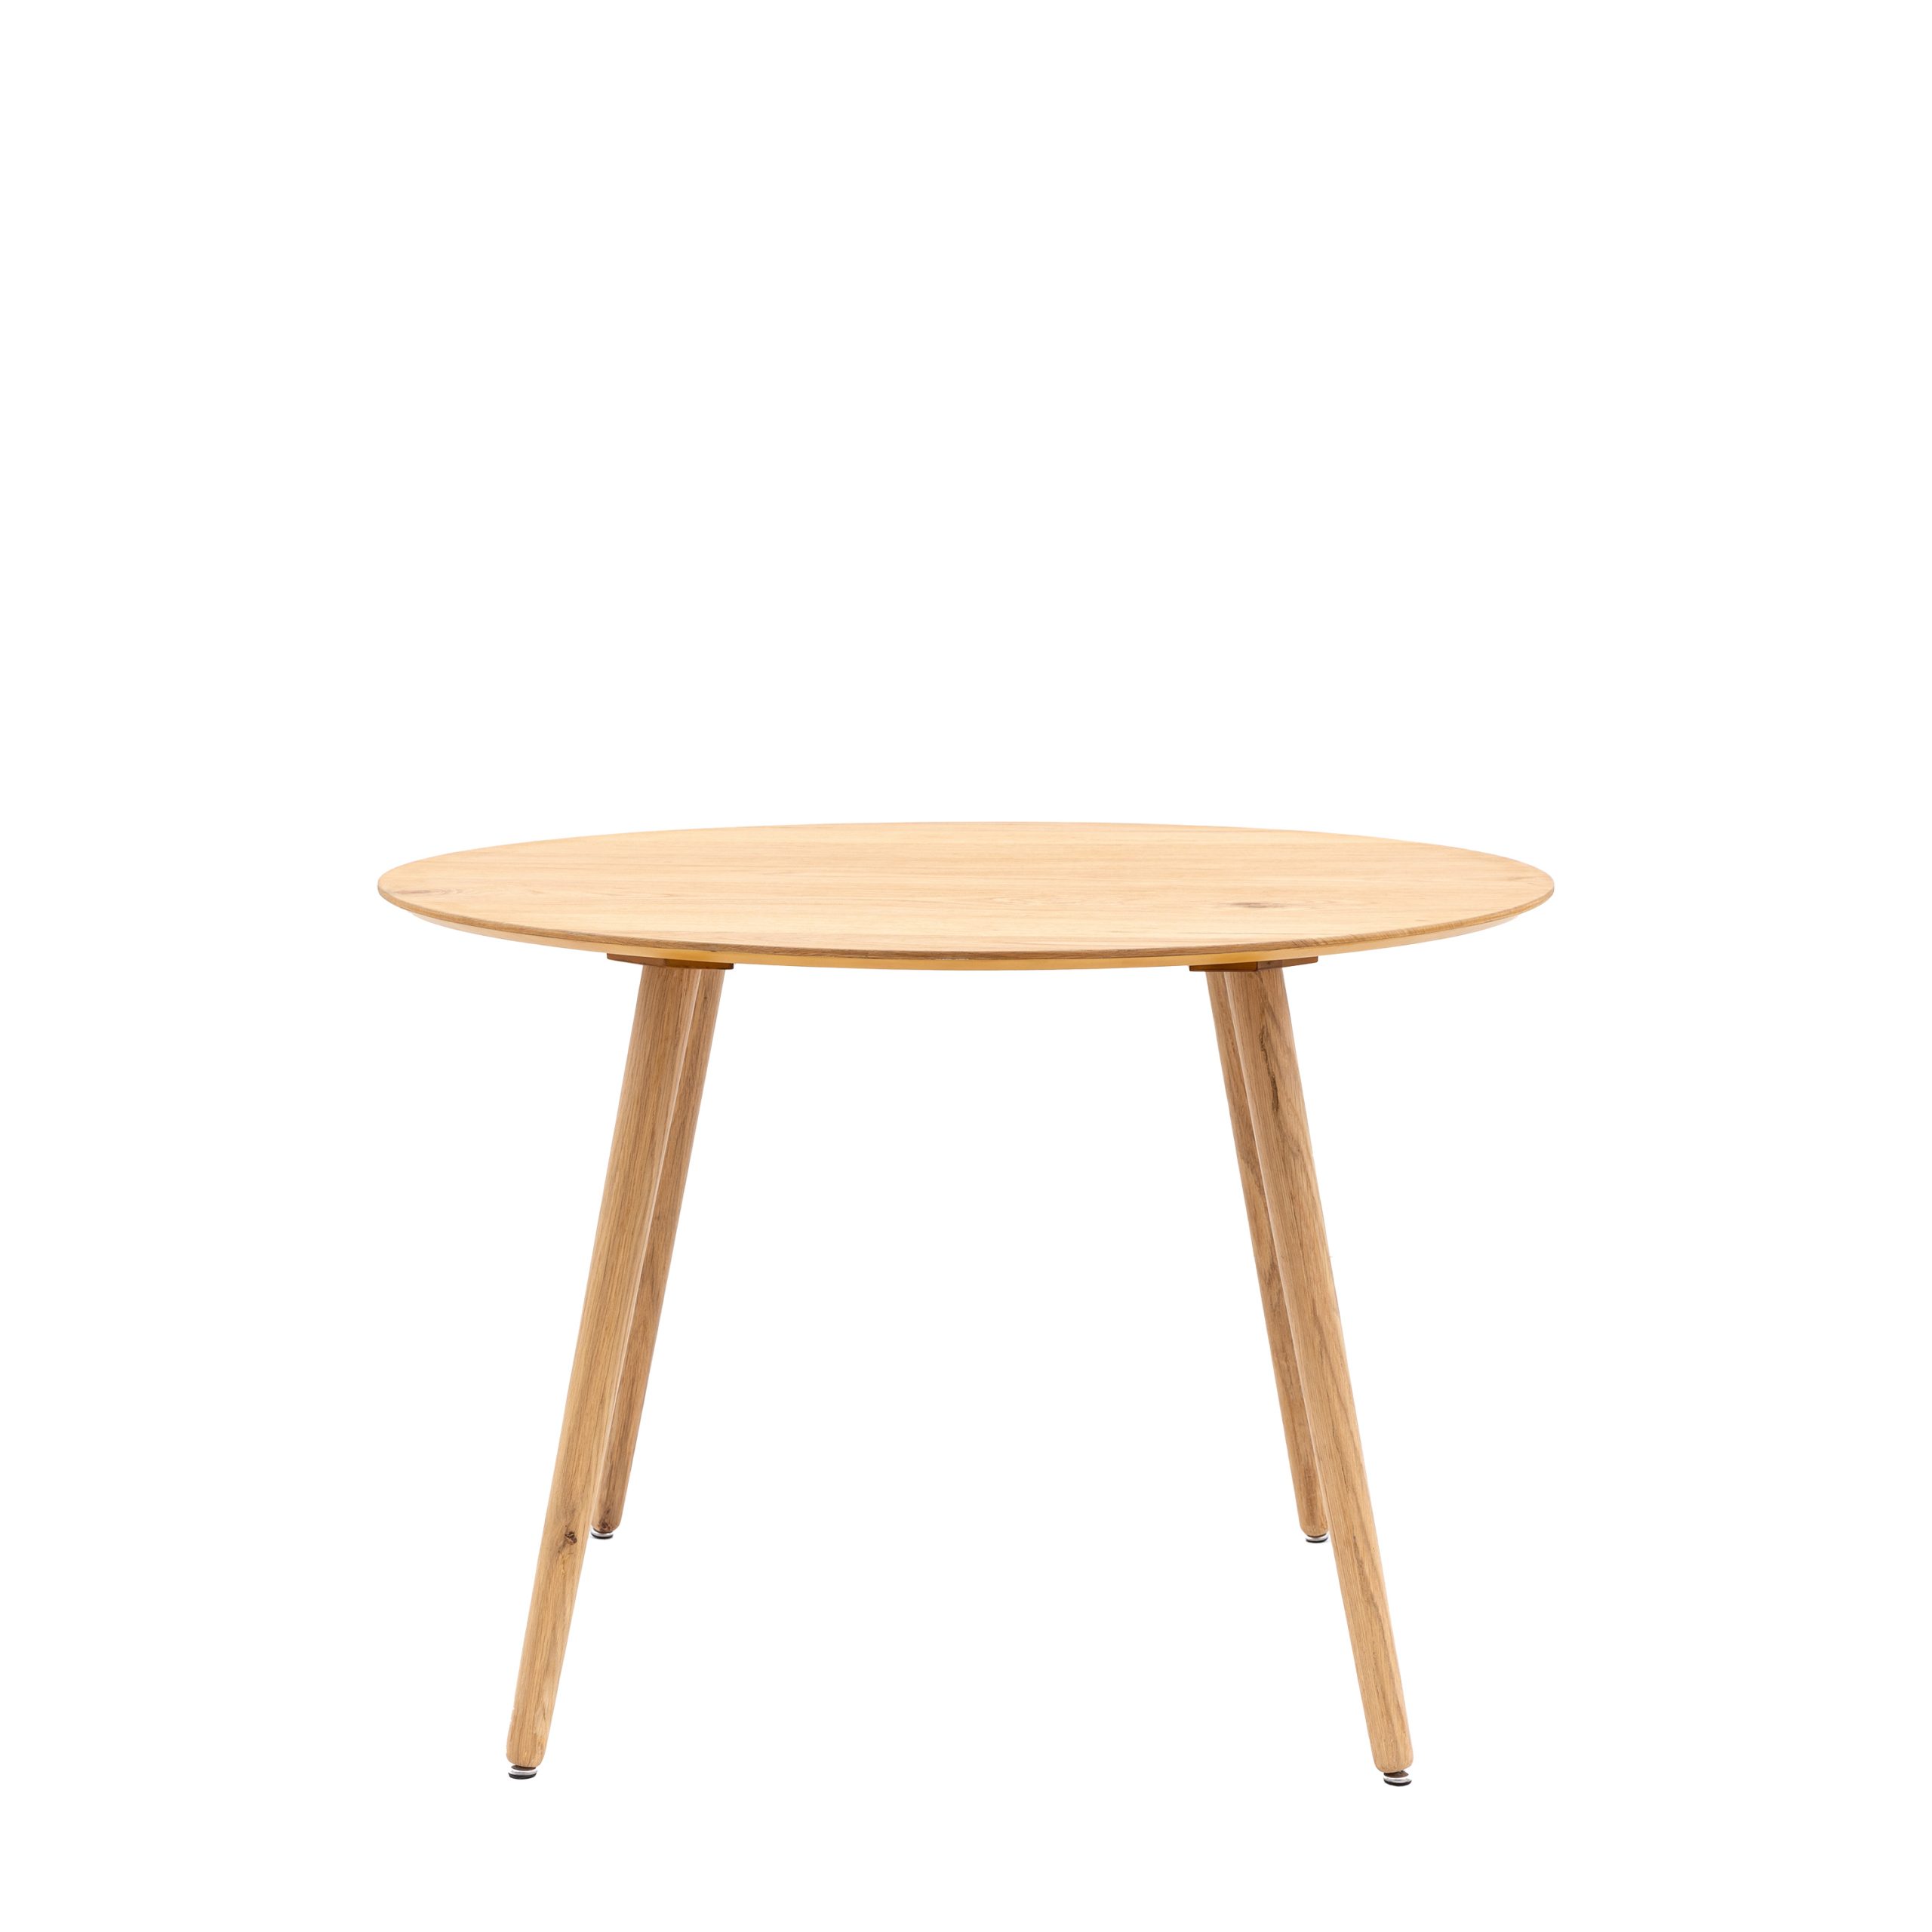 Gallery Direct Hatfield Round Dining Table Natural m